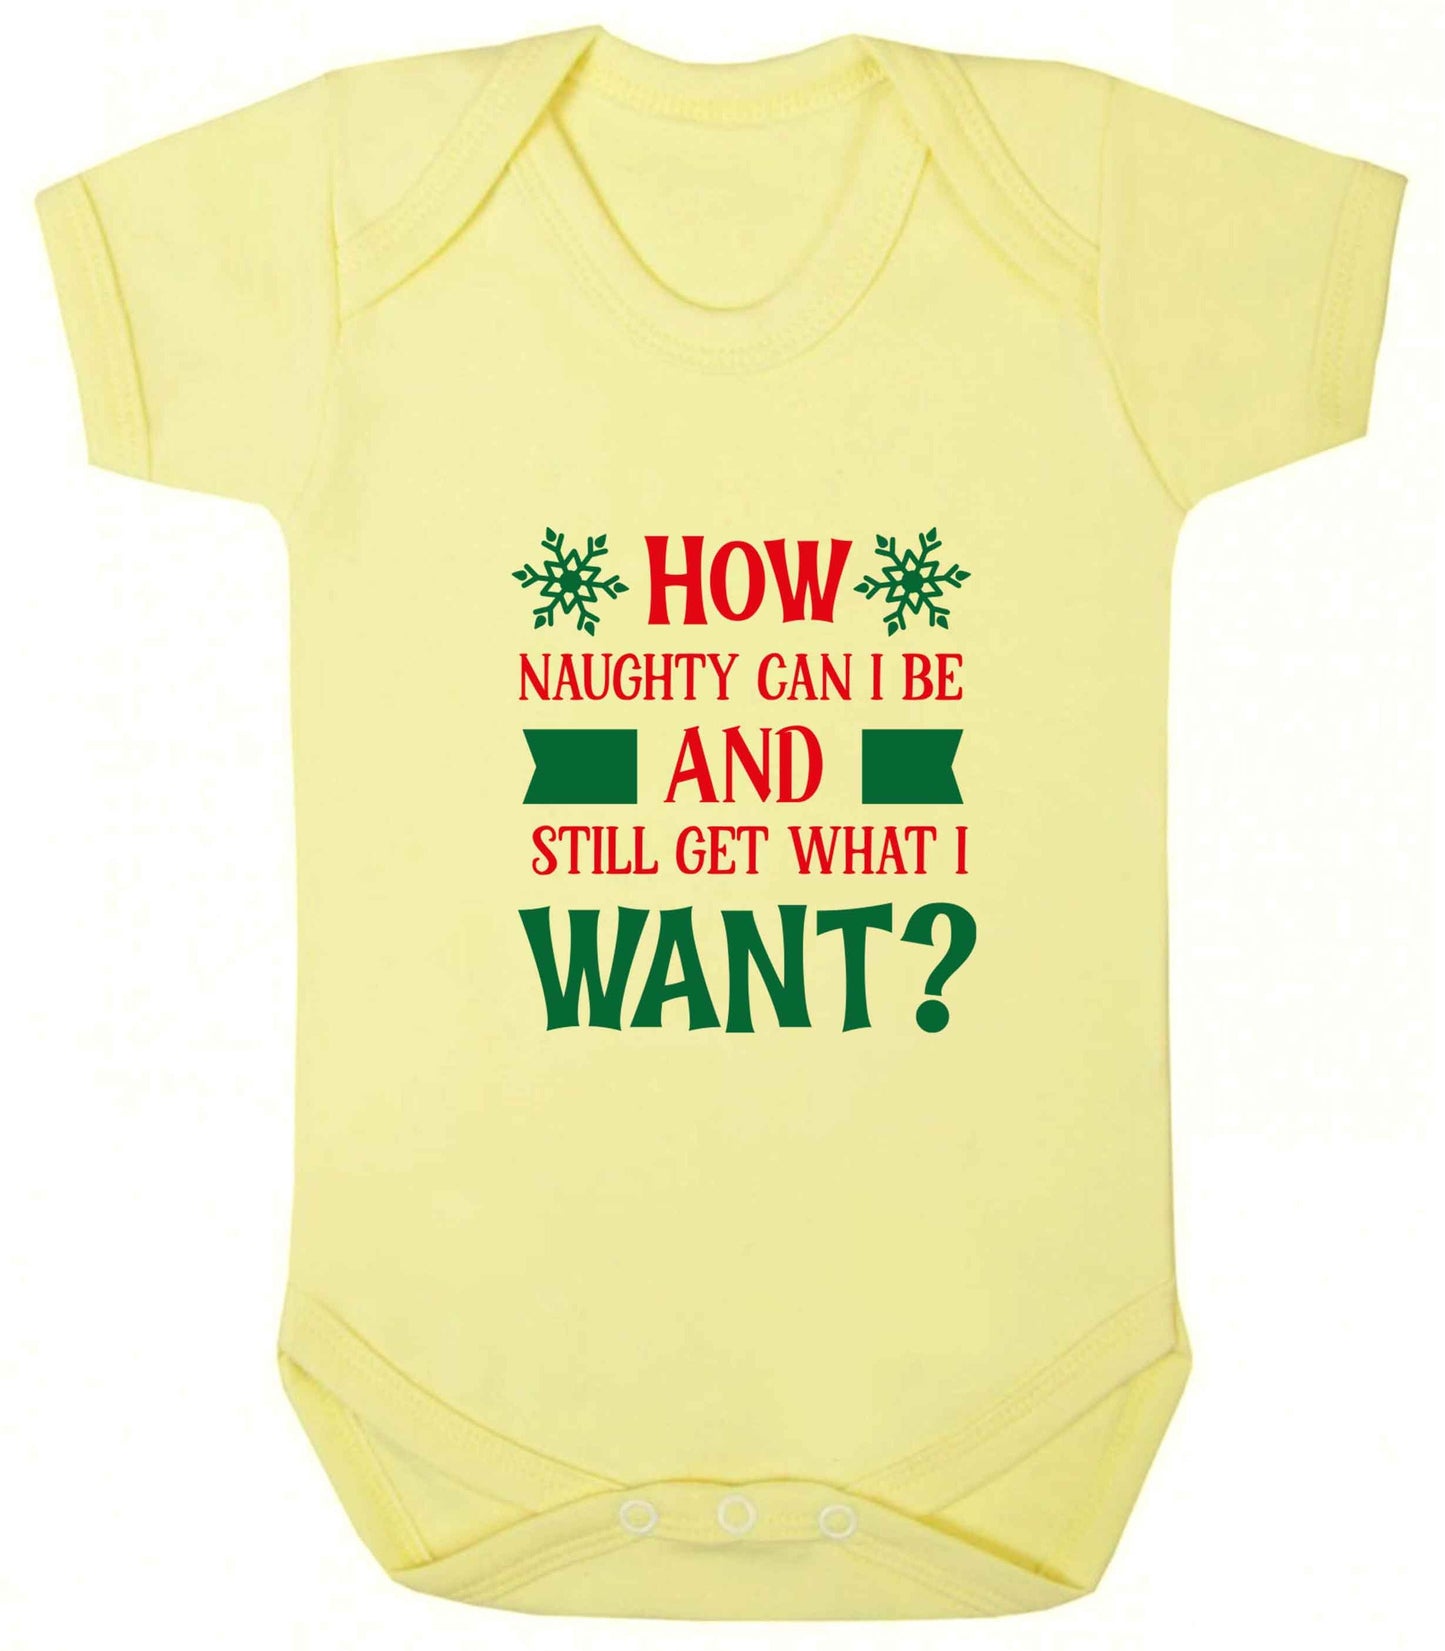 How naughty can I be and still get what I want? baby vest pale yellow 18-24 months